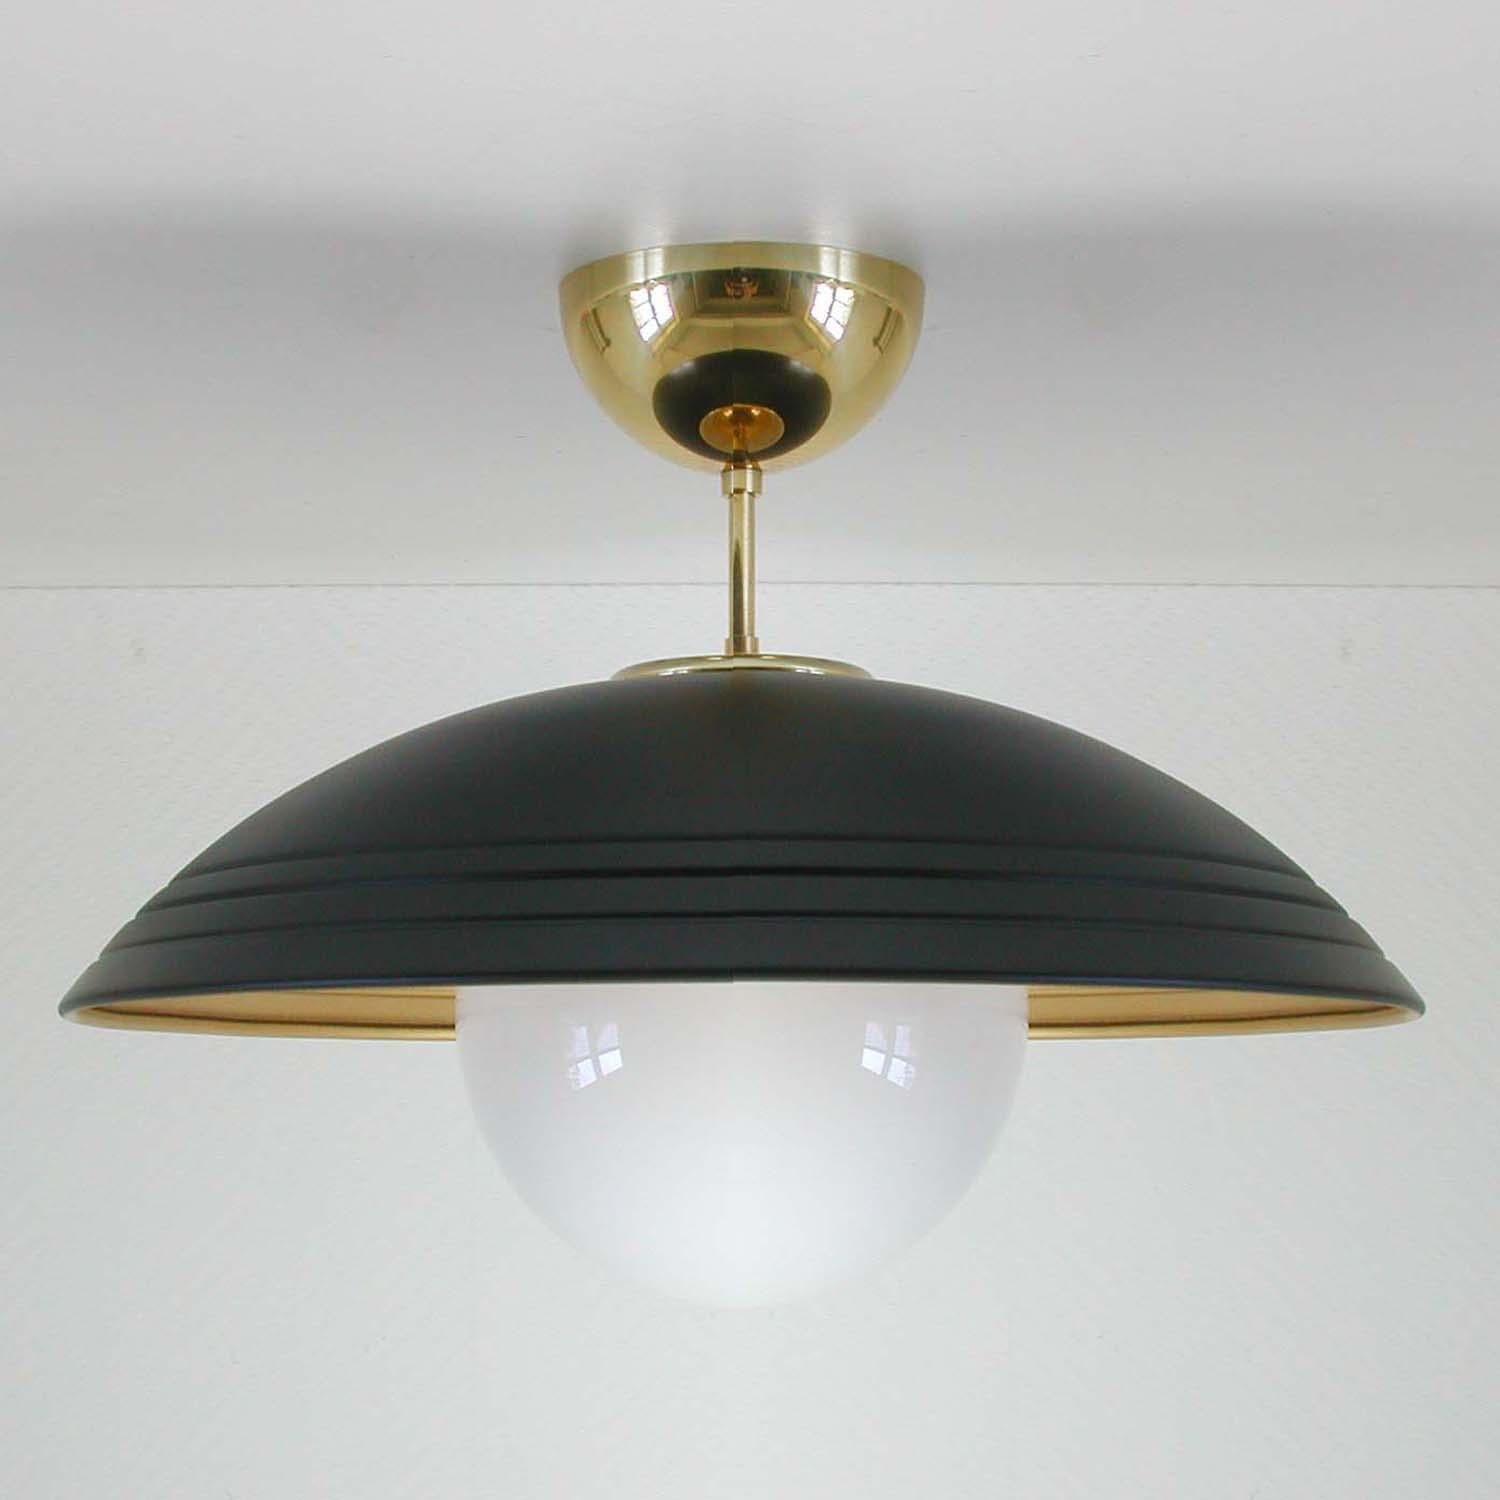 This semi flush mount was made in Italy in the late 1960s, early 1970s. It has got a black lacquered and gilt colored metal lamp shade, white opaline glass globe and brass details.

The light requires one E14 bulb.

Rewired for use in US.